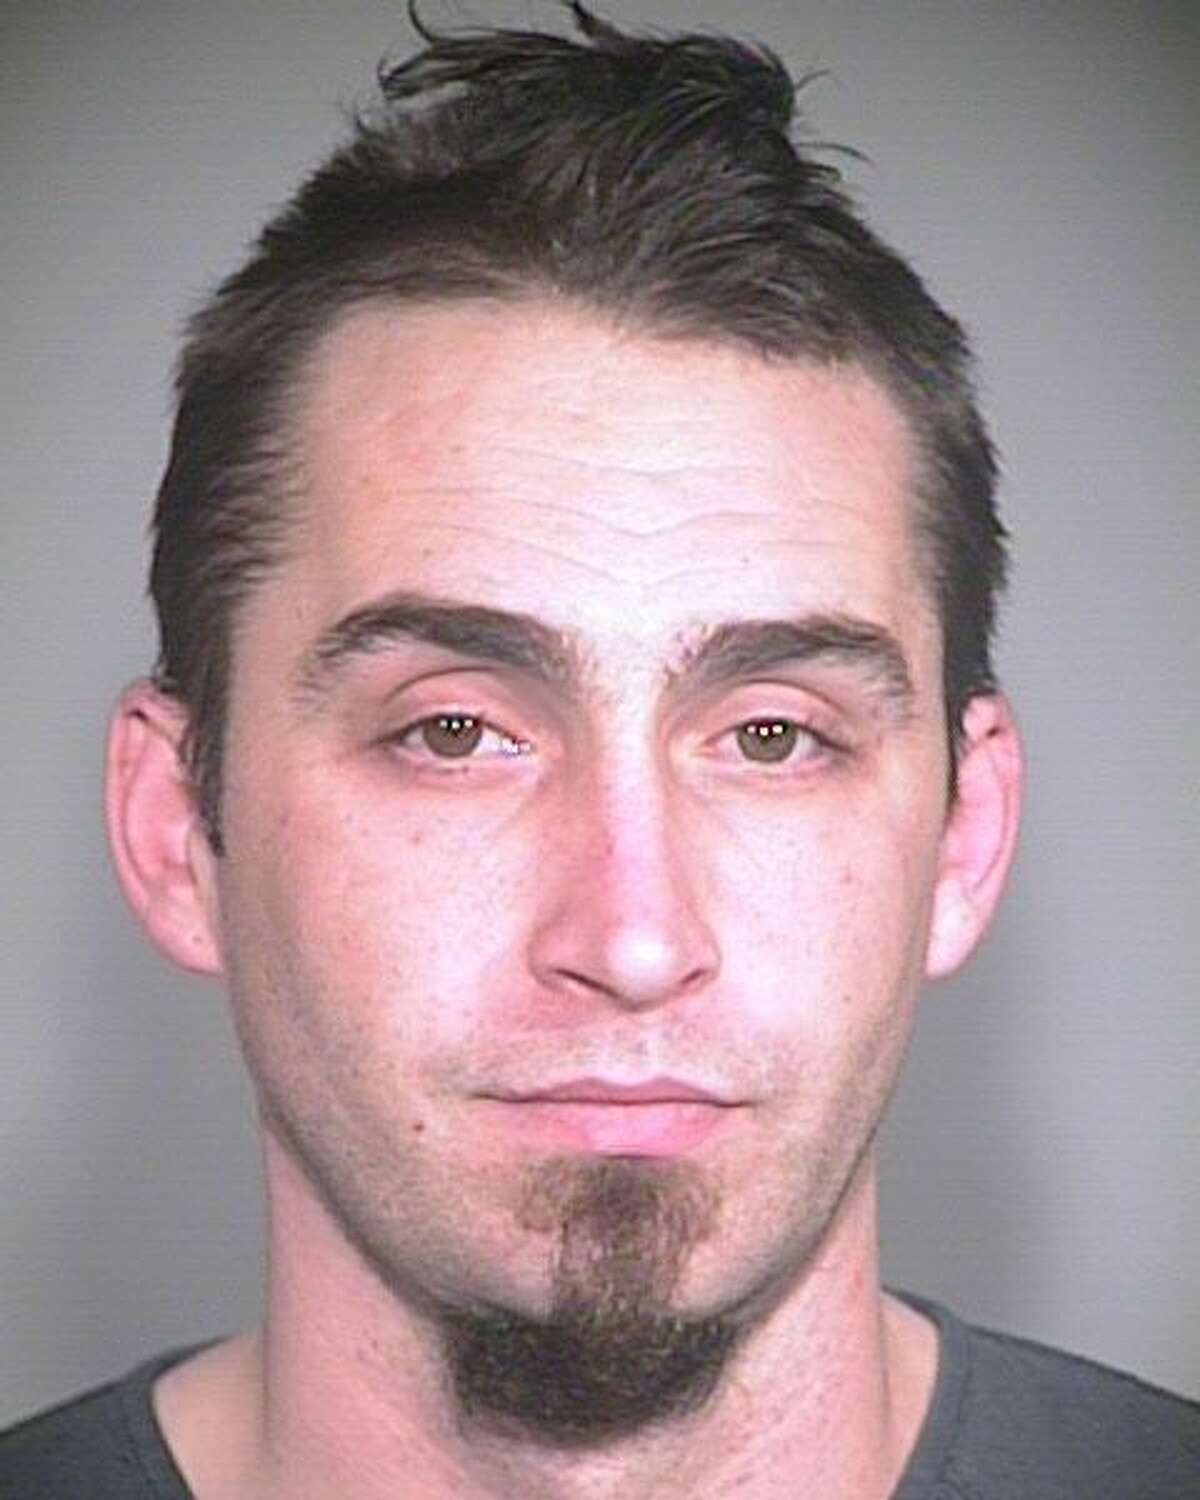 This image released by the Portland, Ore., Police Bureau, shows David Kalac, 33, who police say is a suspect in the killing of a woman in Port Orchard, Wash., where graphic photos of the victim's body were posted online hours before before police found the body. ( AP Photo/Portland Police Bureau)